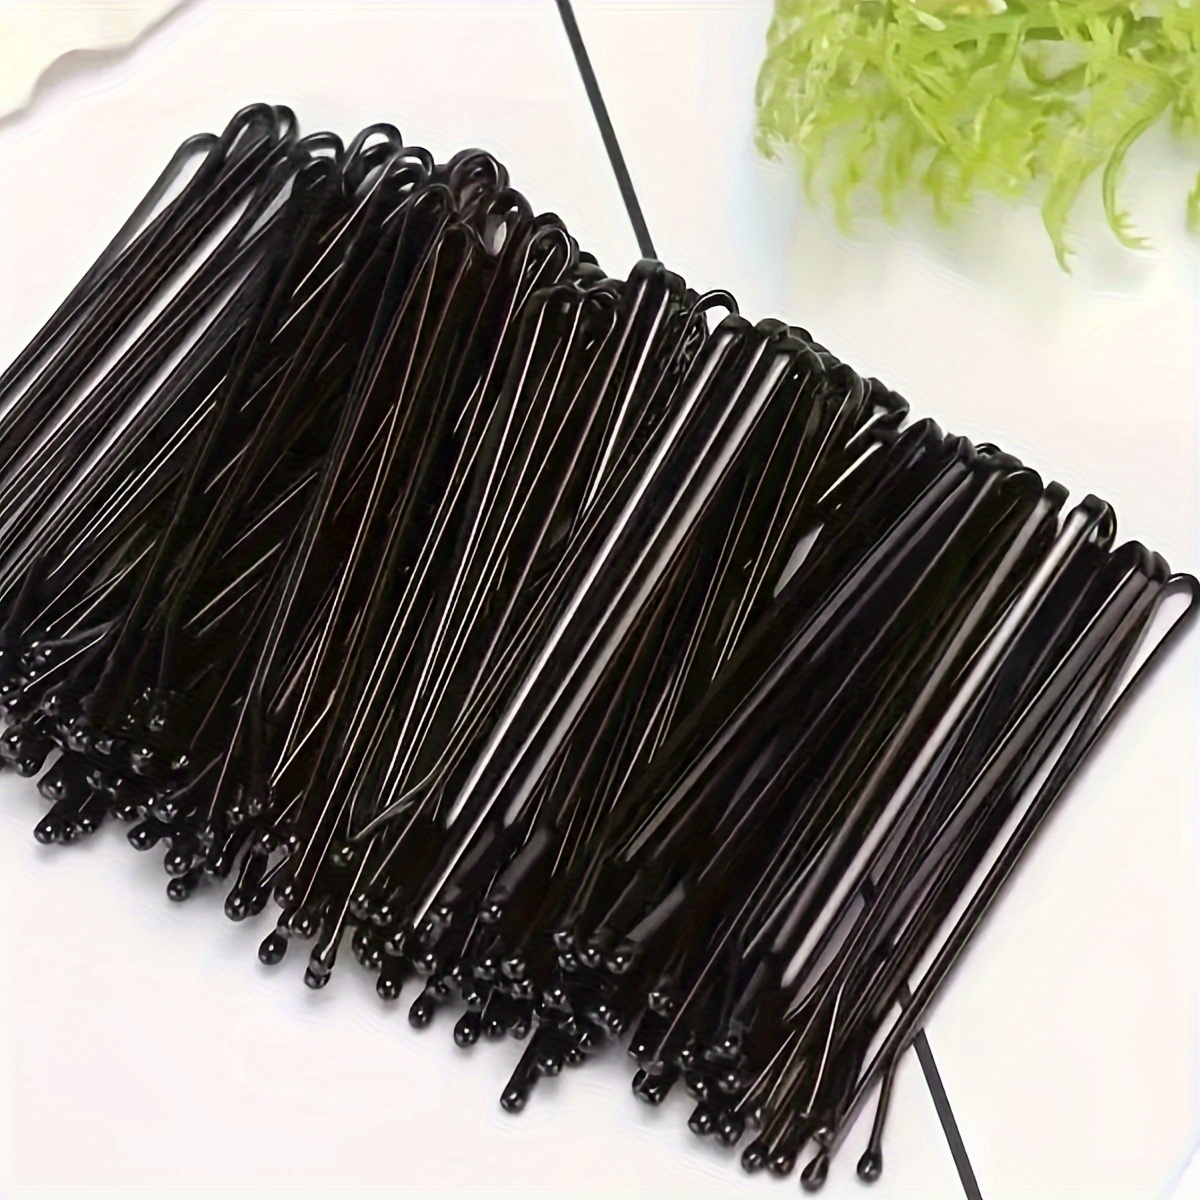 100pcs Hair Extension Clips, Multipurpose 38mm 10 Teeth Wig Clips for Hair  Extensions DIY Black